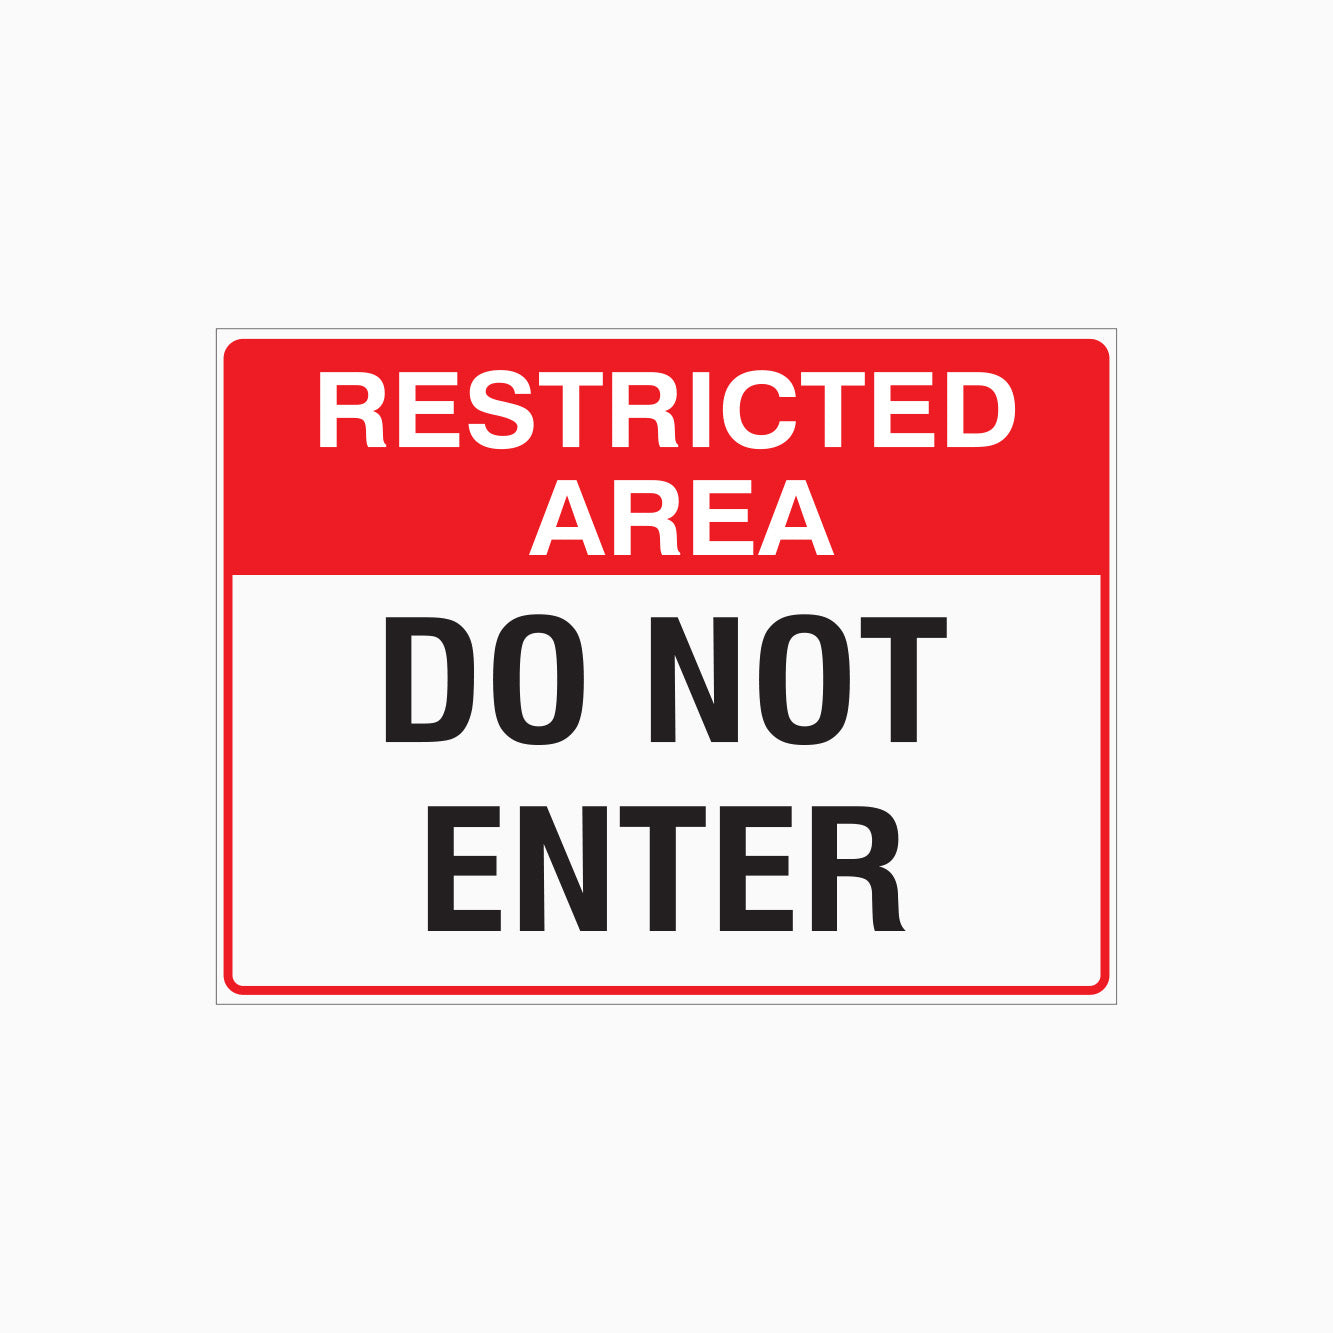 RESTRICTED AREA SIGN - DO NOT ENTER SIGN